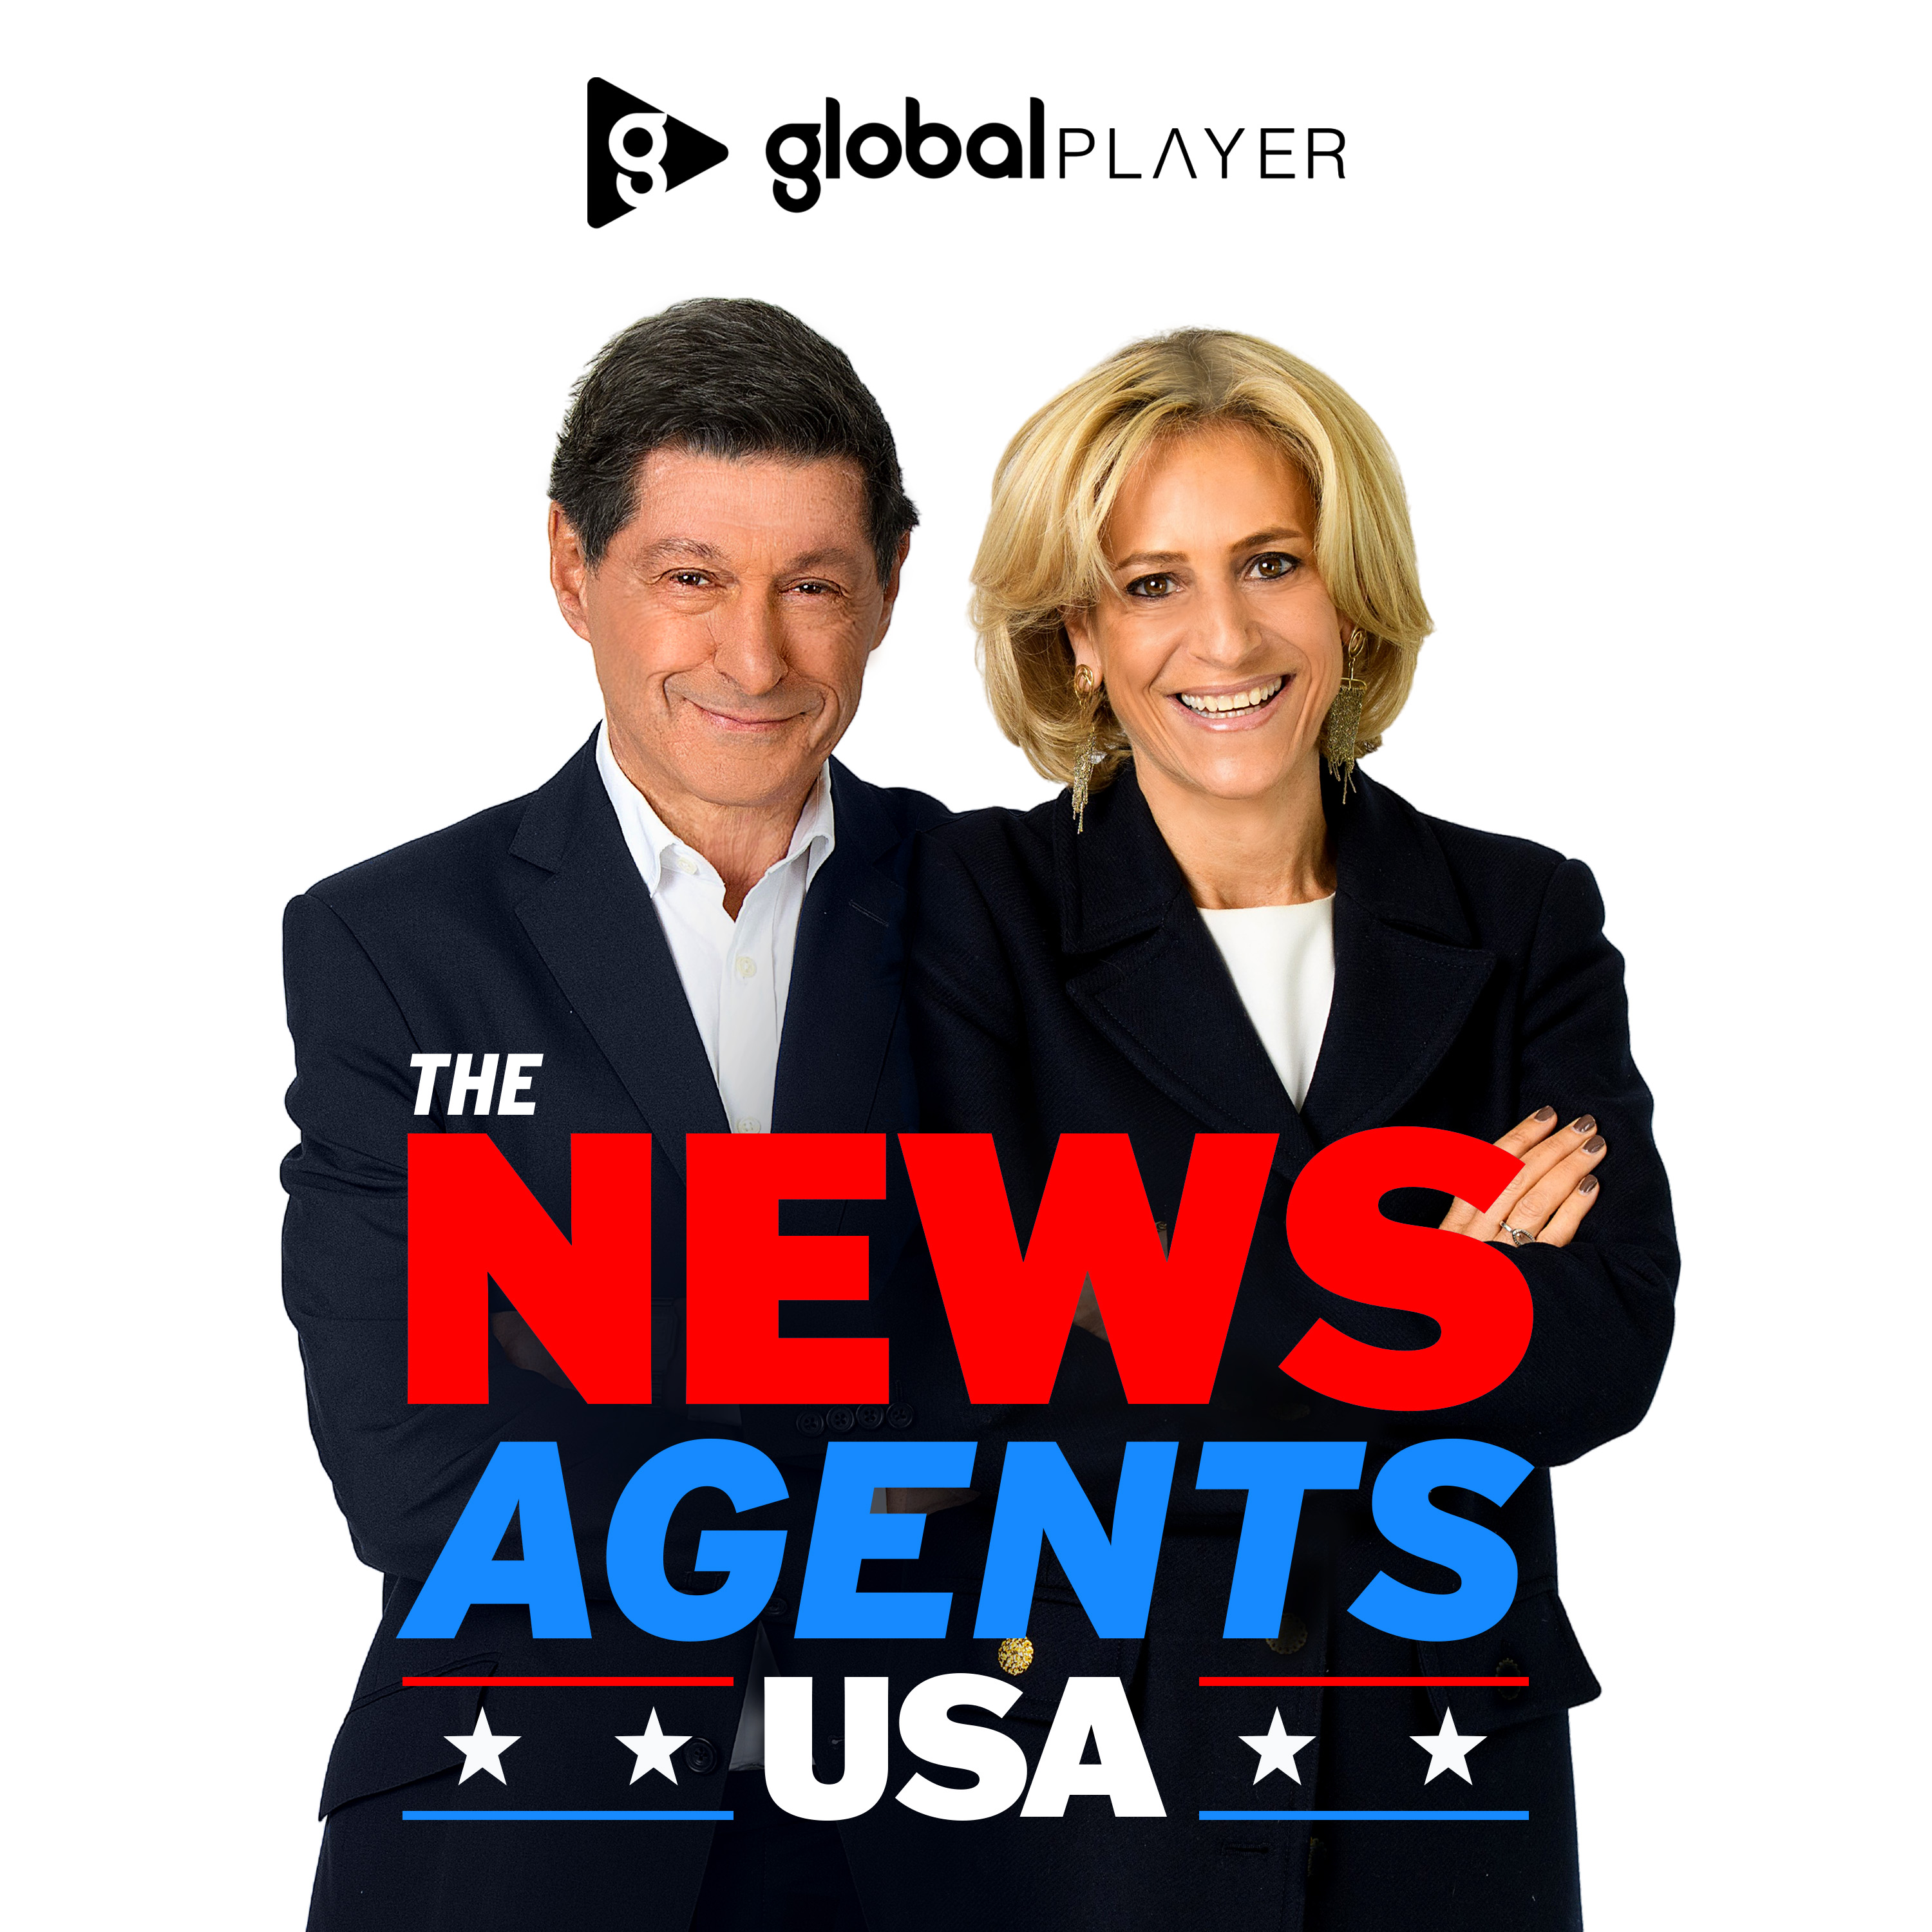 This week on The News Agents USA: Can any other Republican beat Donald Trump? The second debate